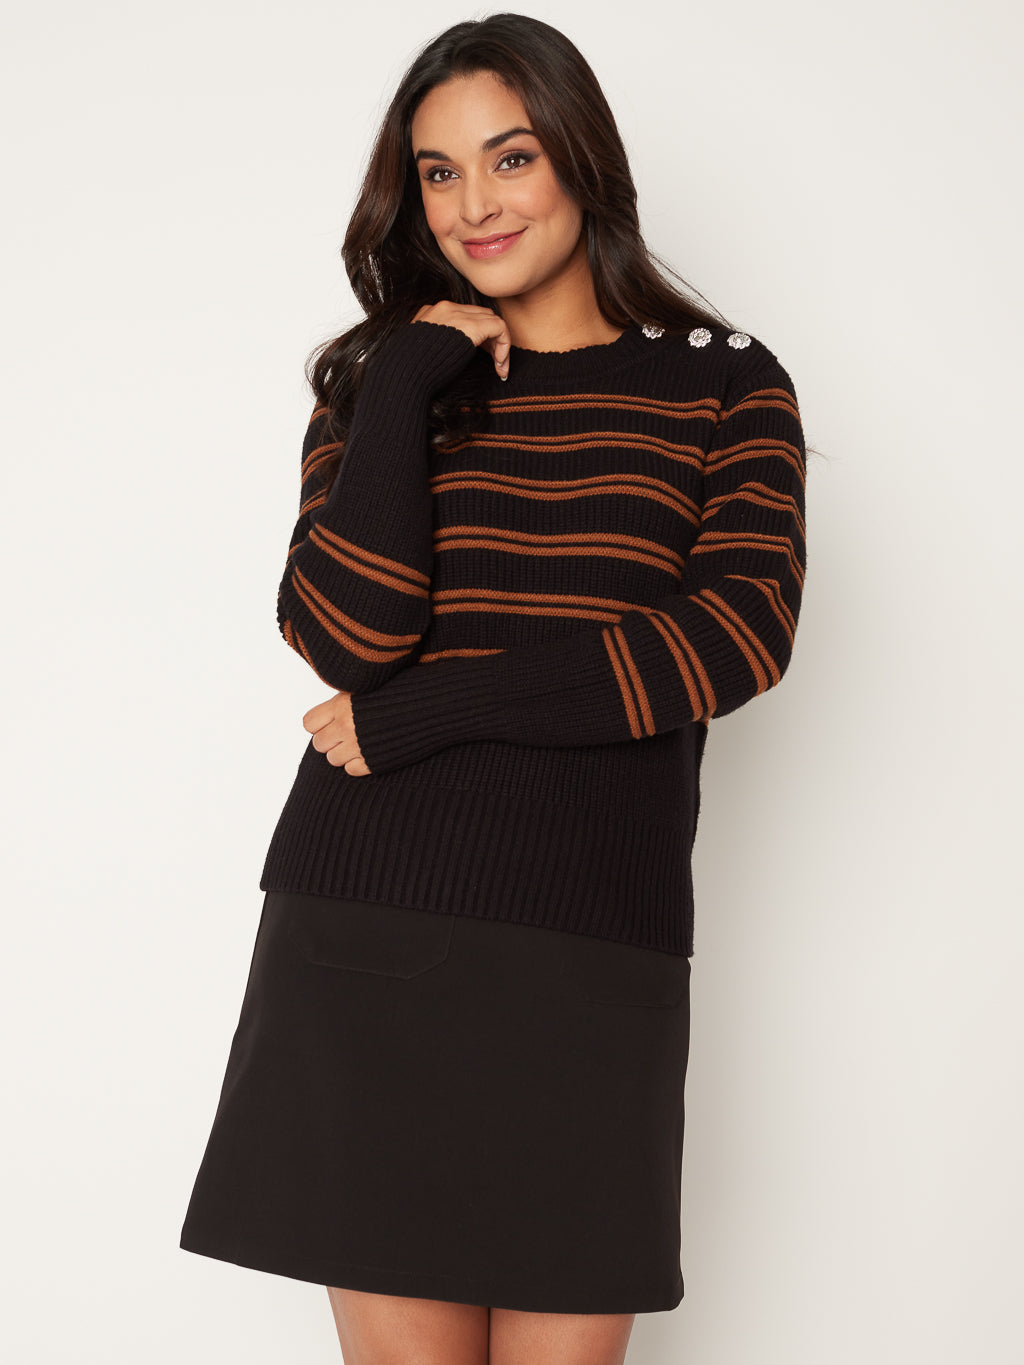 Striped knit pullover with buttons